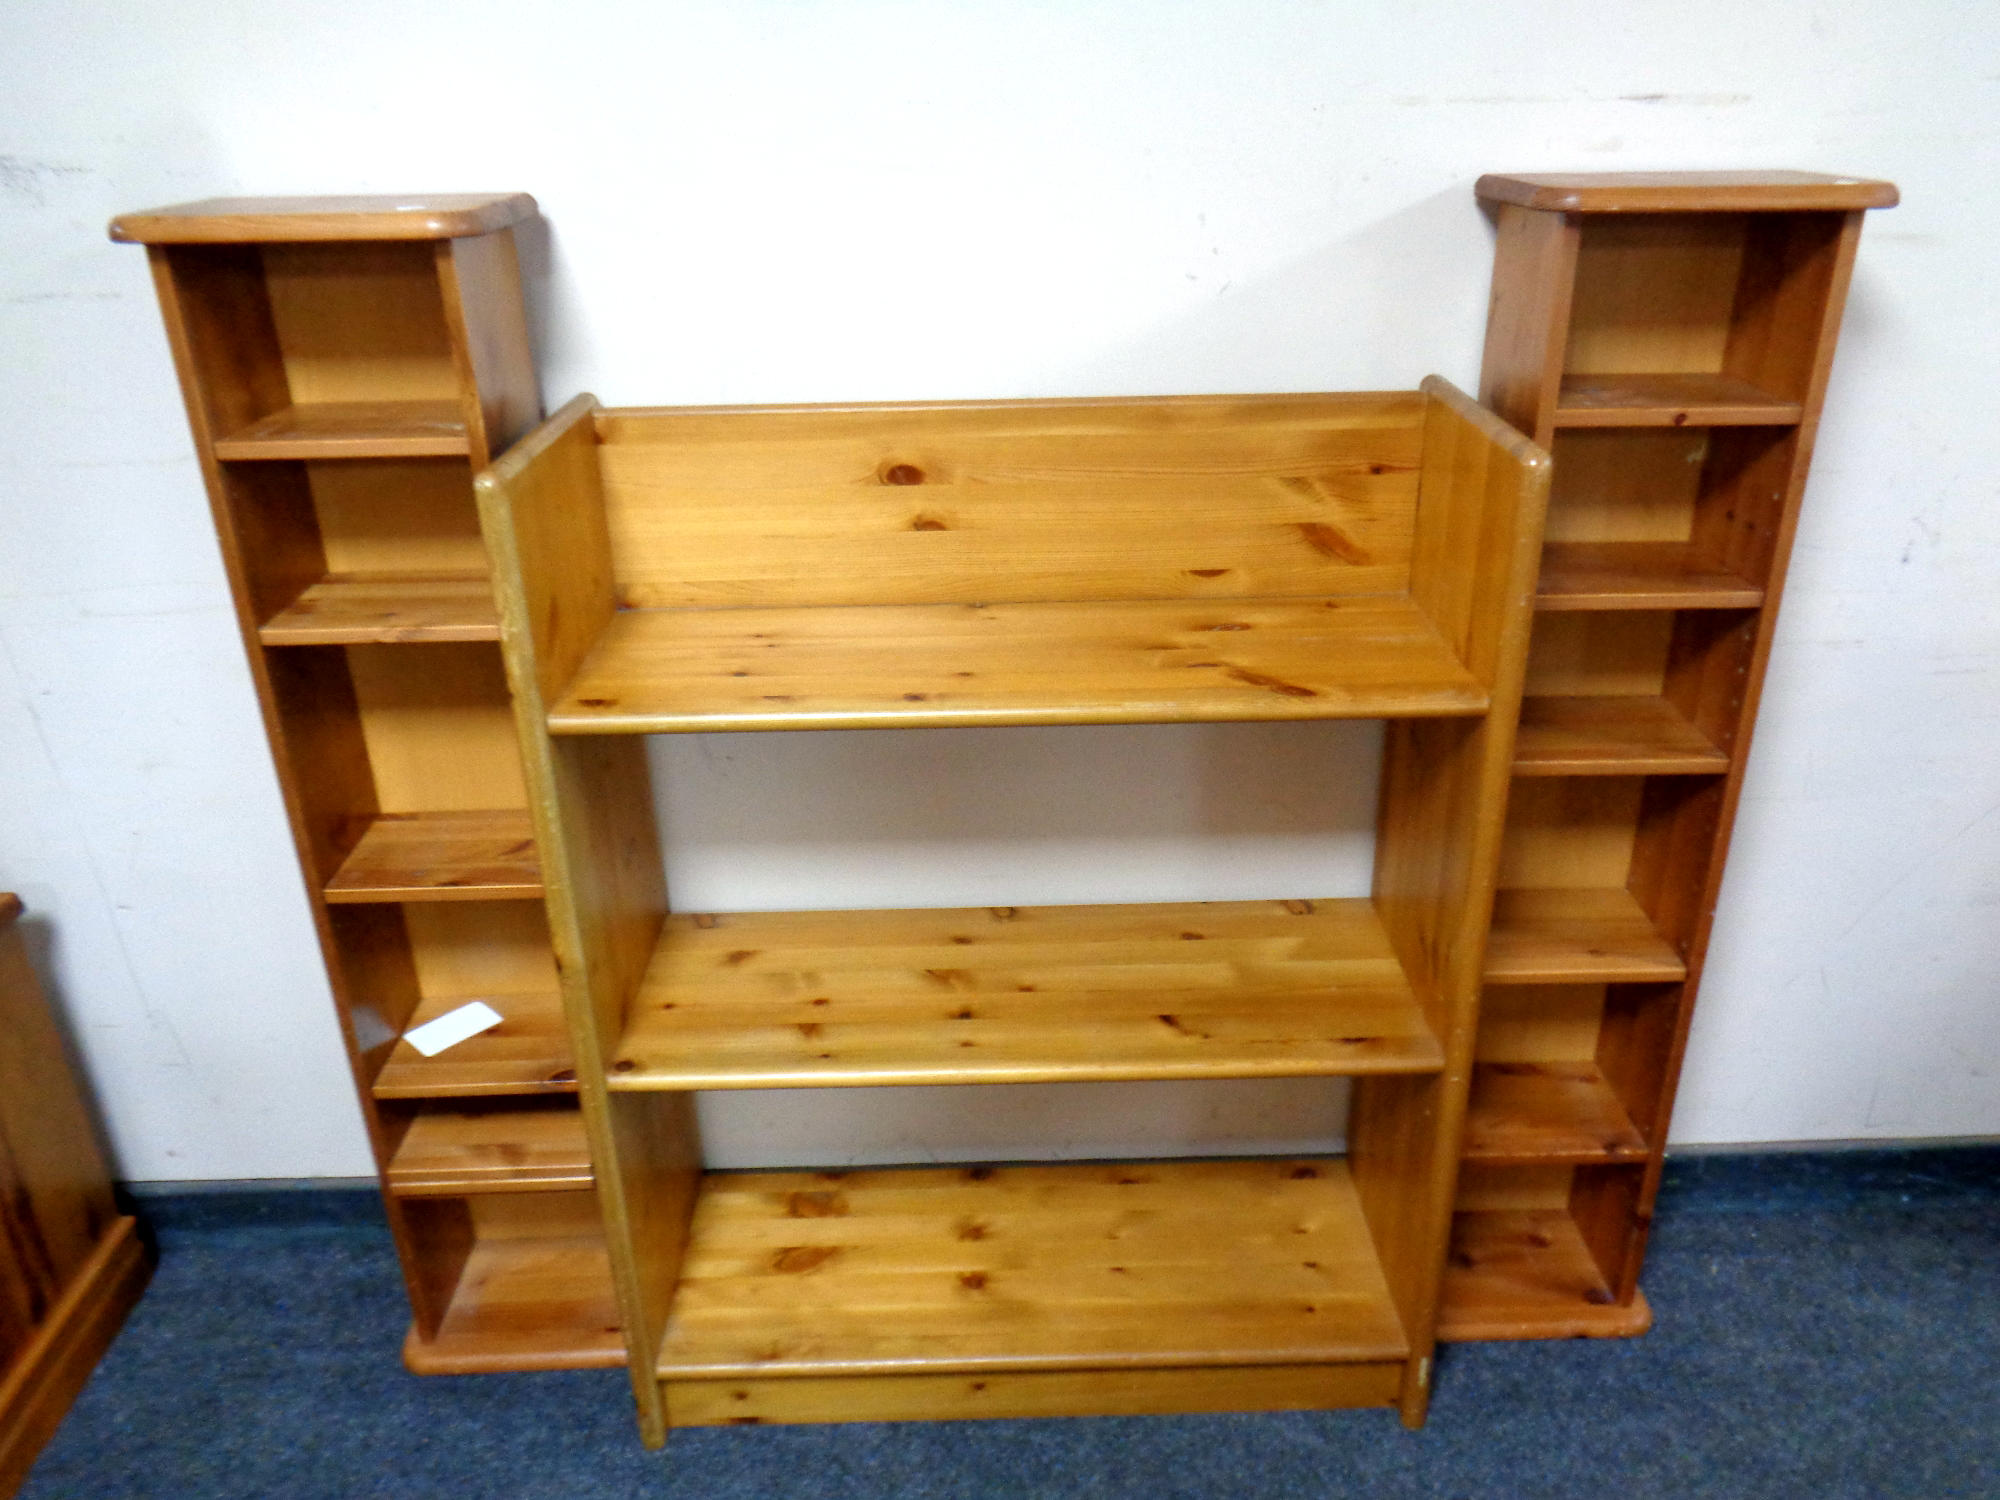 A set of pine open shelves together with two media stands